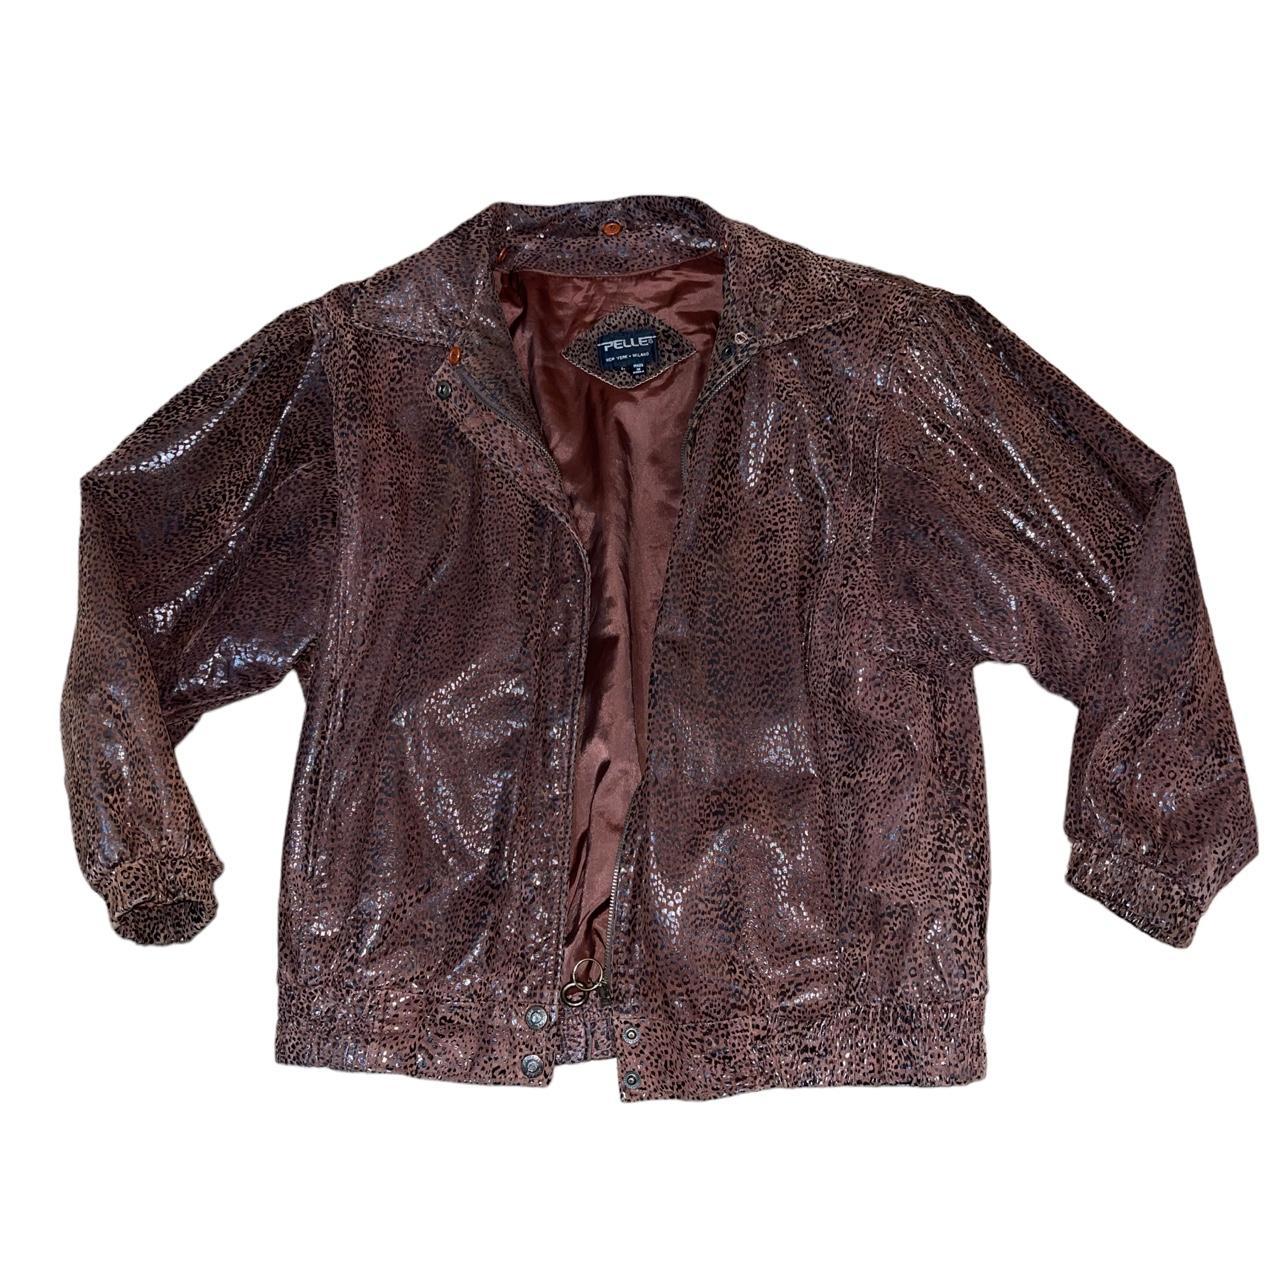 Women's Brown and Black Jacket